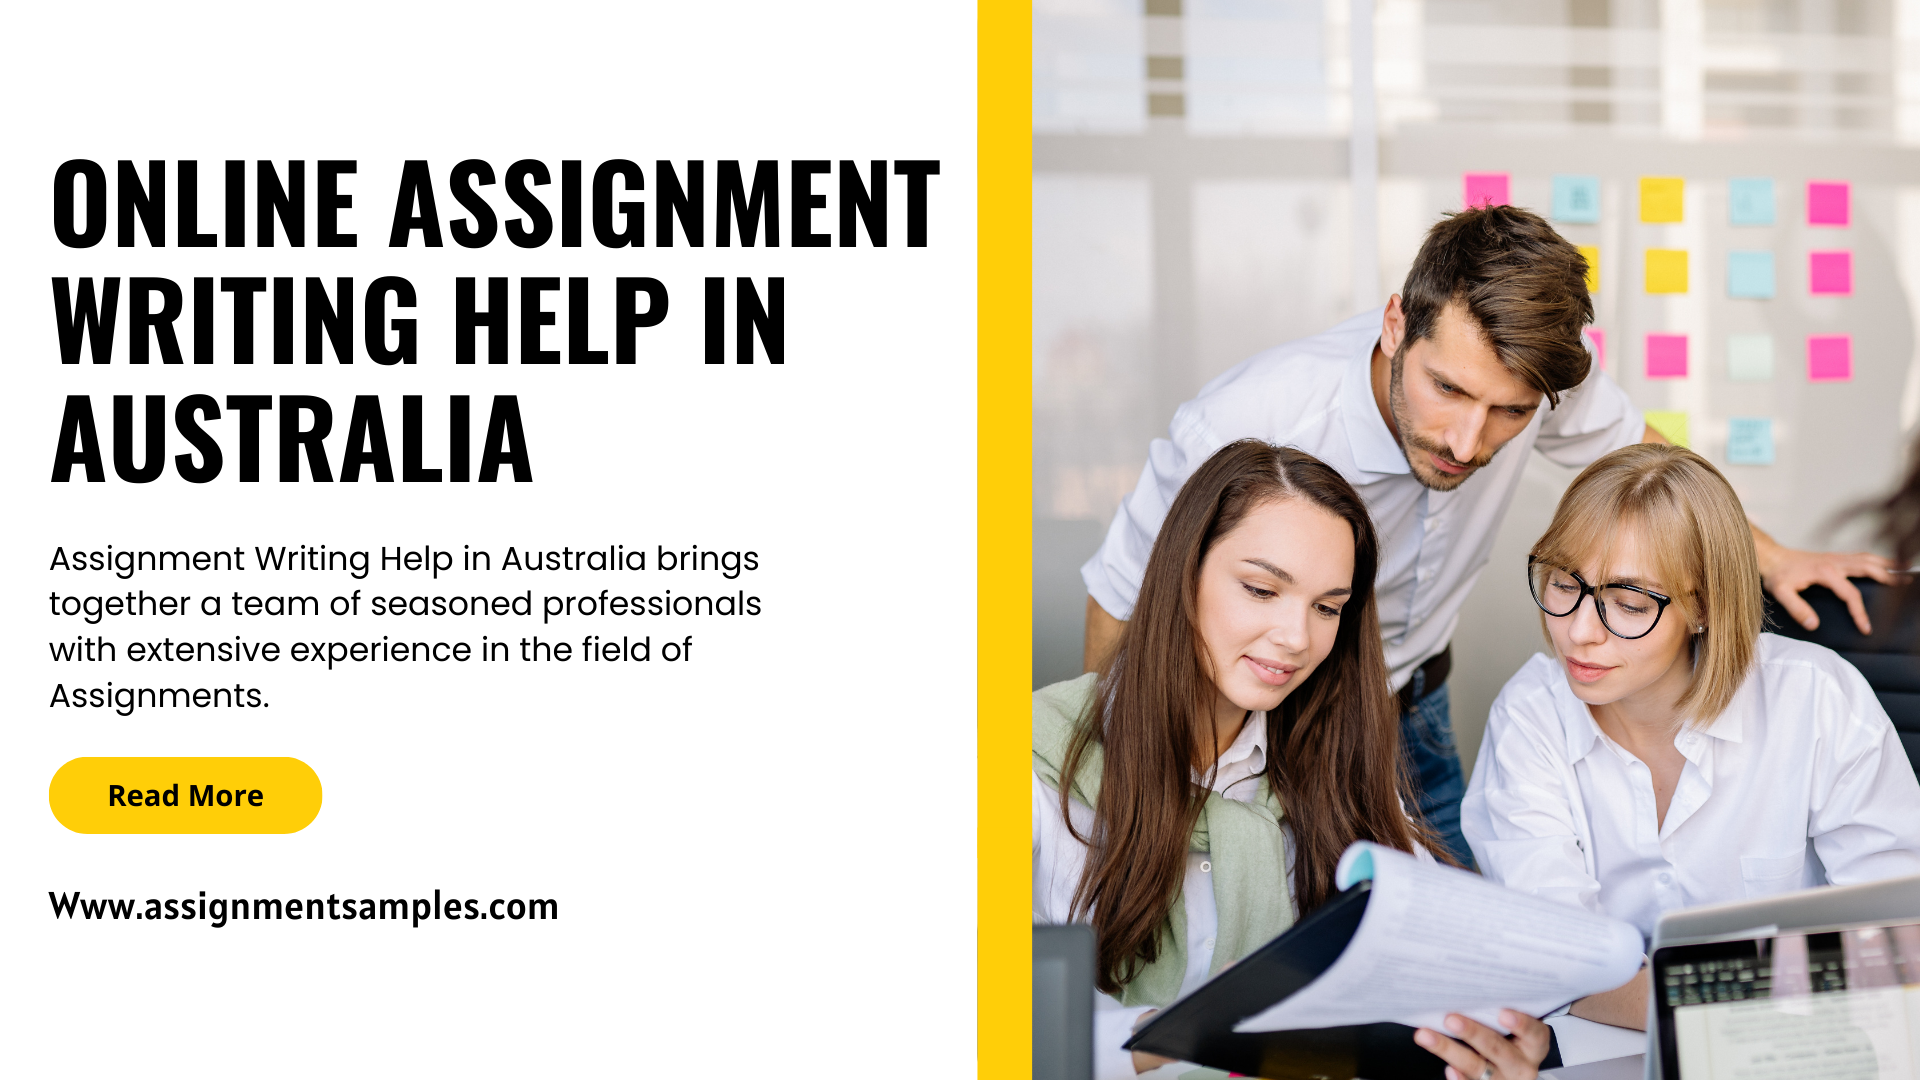 Assignment Writing Help in Australia